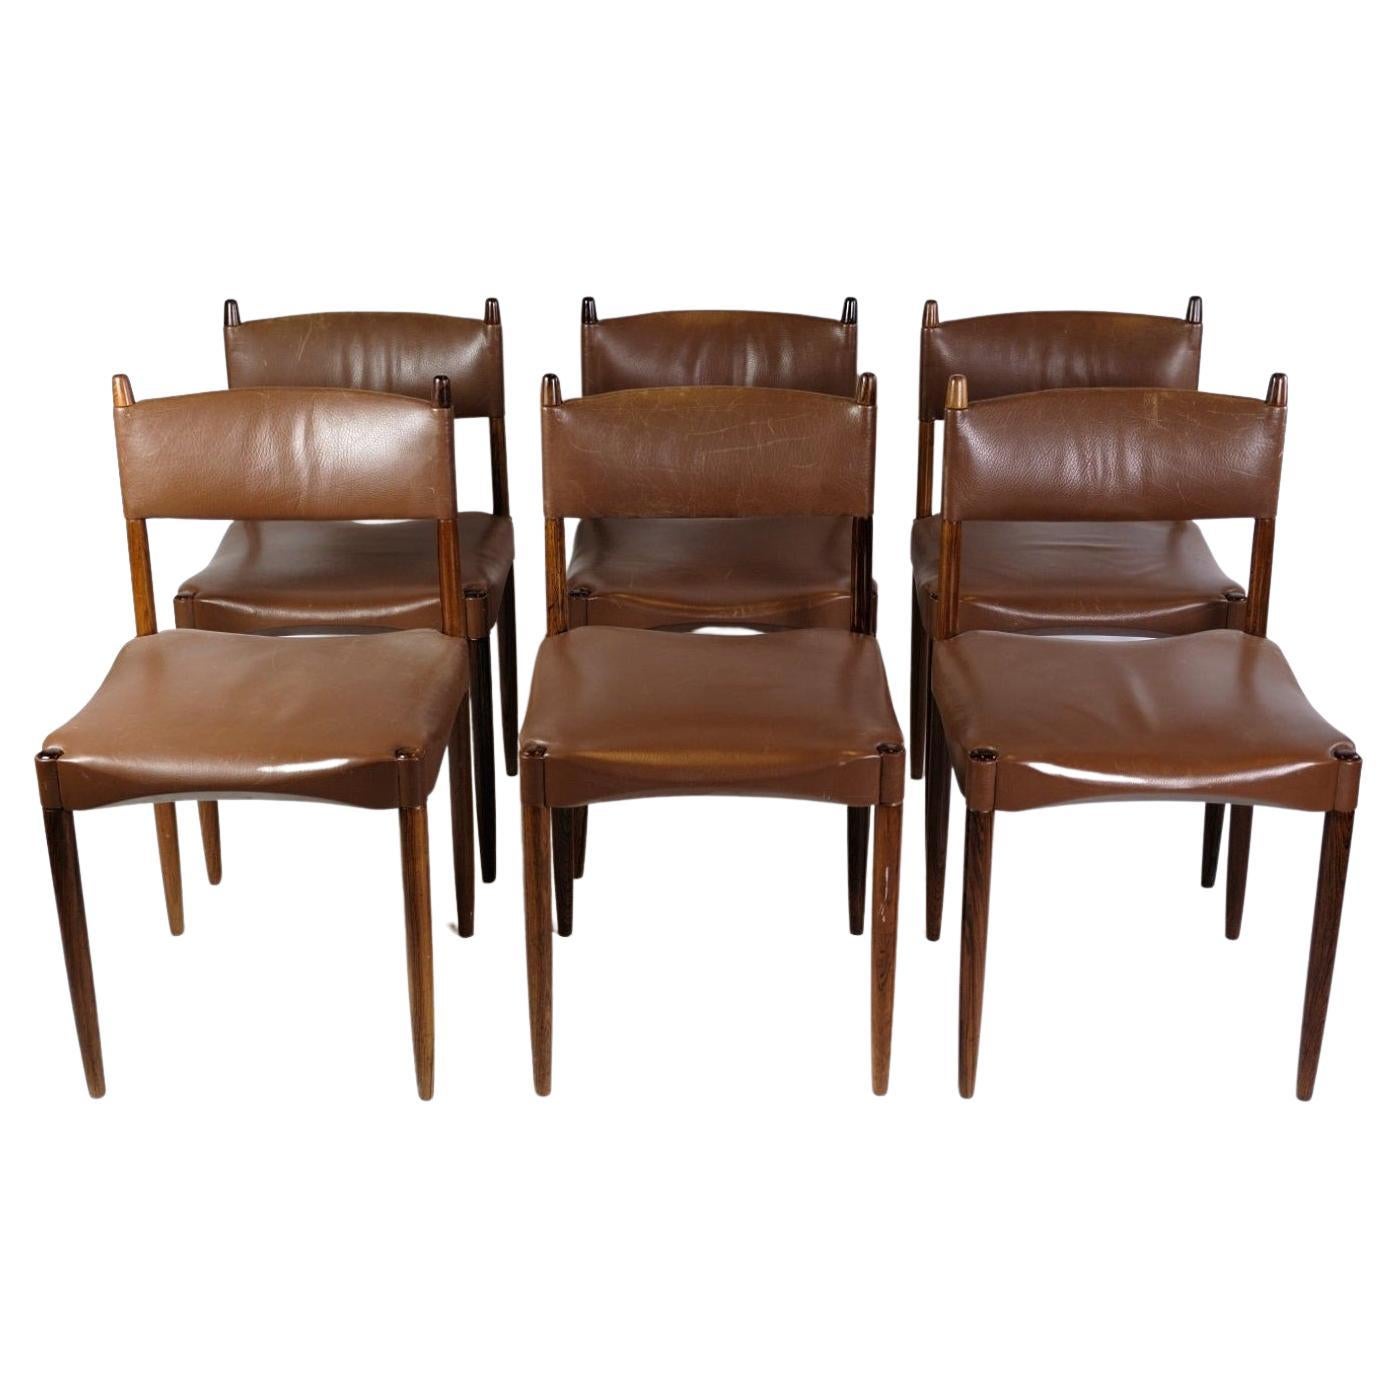 Set of 6 Chairs Made Of Solid Rosewood From 1960s